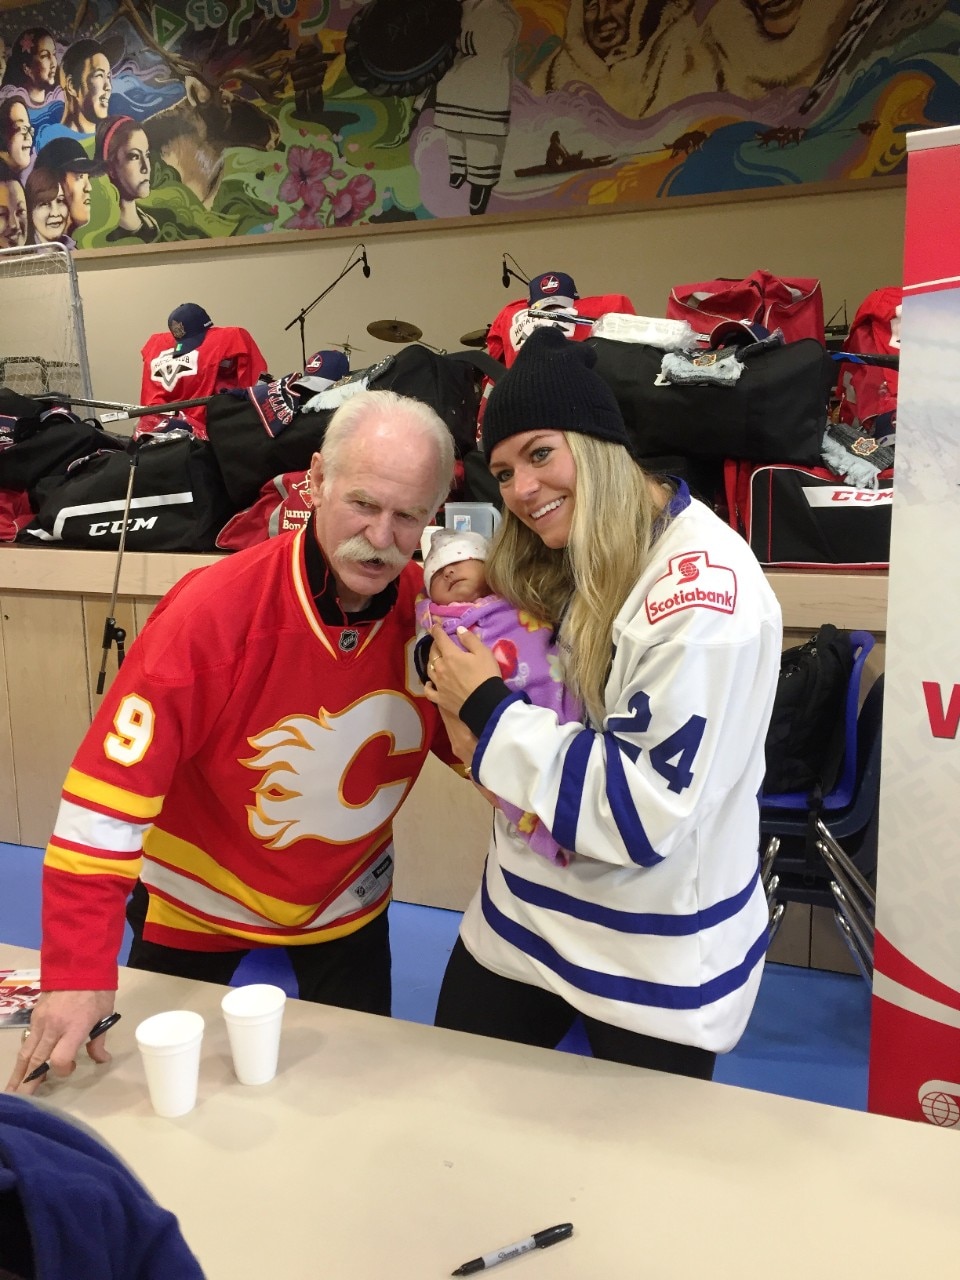 A very young fan poses for a picture with Lanny, Natalie and lots of new donated hockey equipment in the background, during the Project North event celebration in Gjoa Haven.